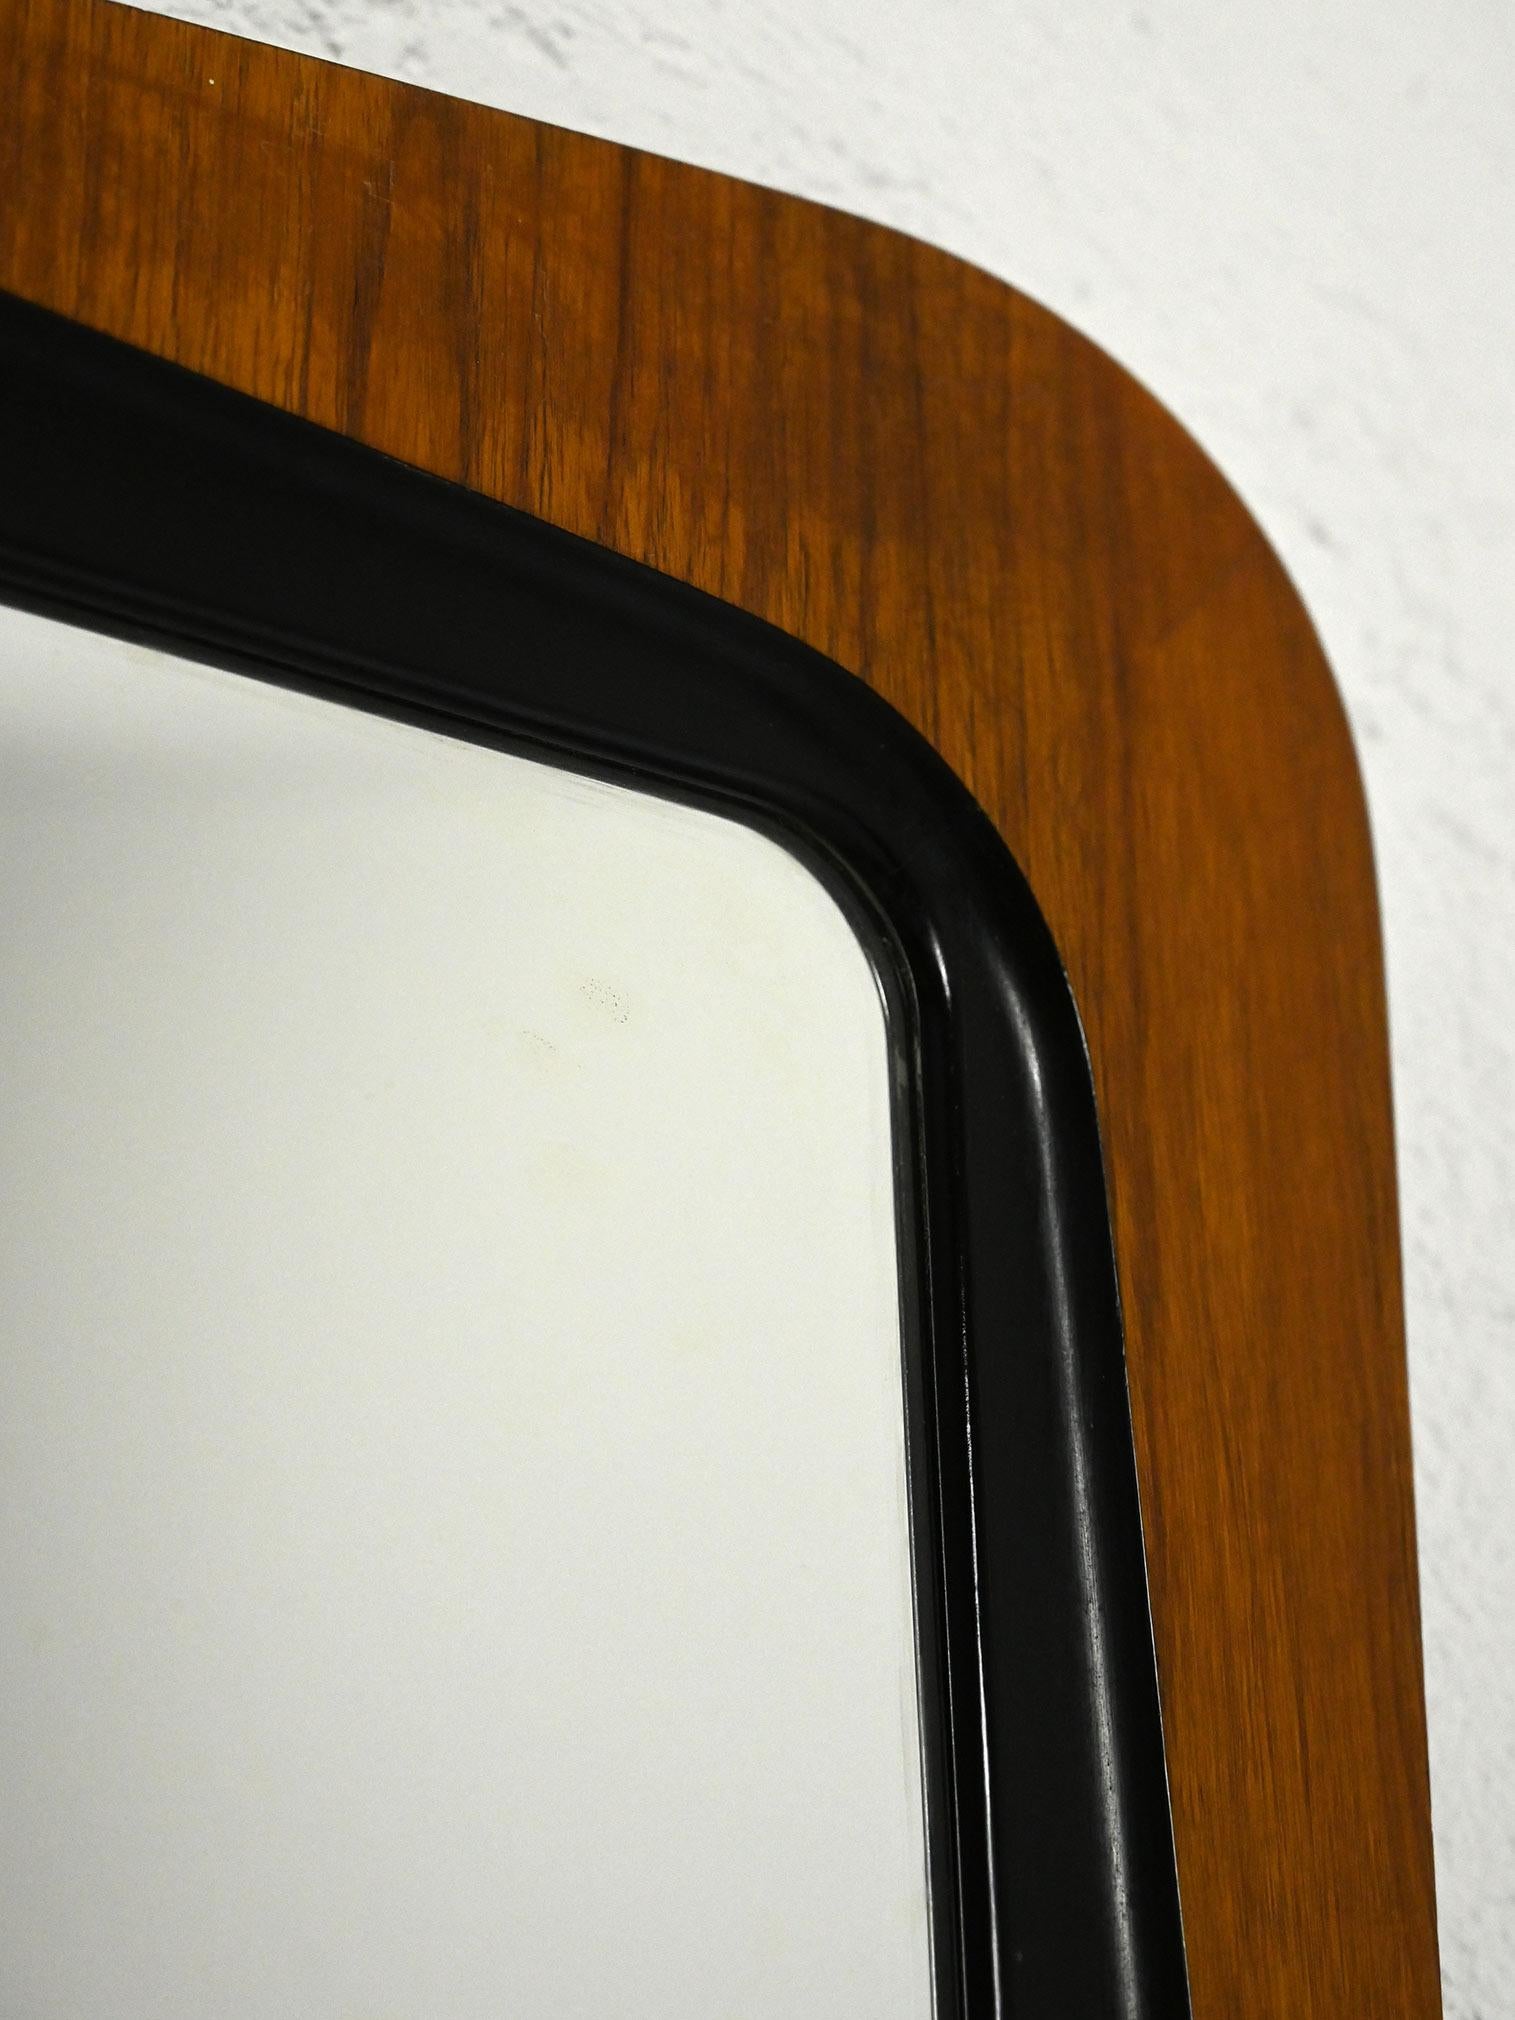 Scandinavian 1960s vintage mirror.

Vintage Scandinavian teak-framed mirror with a distinctive shape, slightly protruding, and small size. The distinctive detail of the frame is accentuated by a black outline around the mirror, adding a touch of